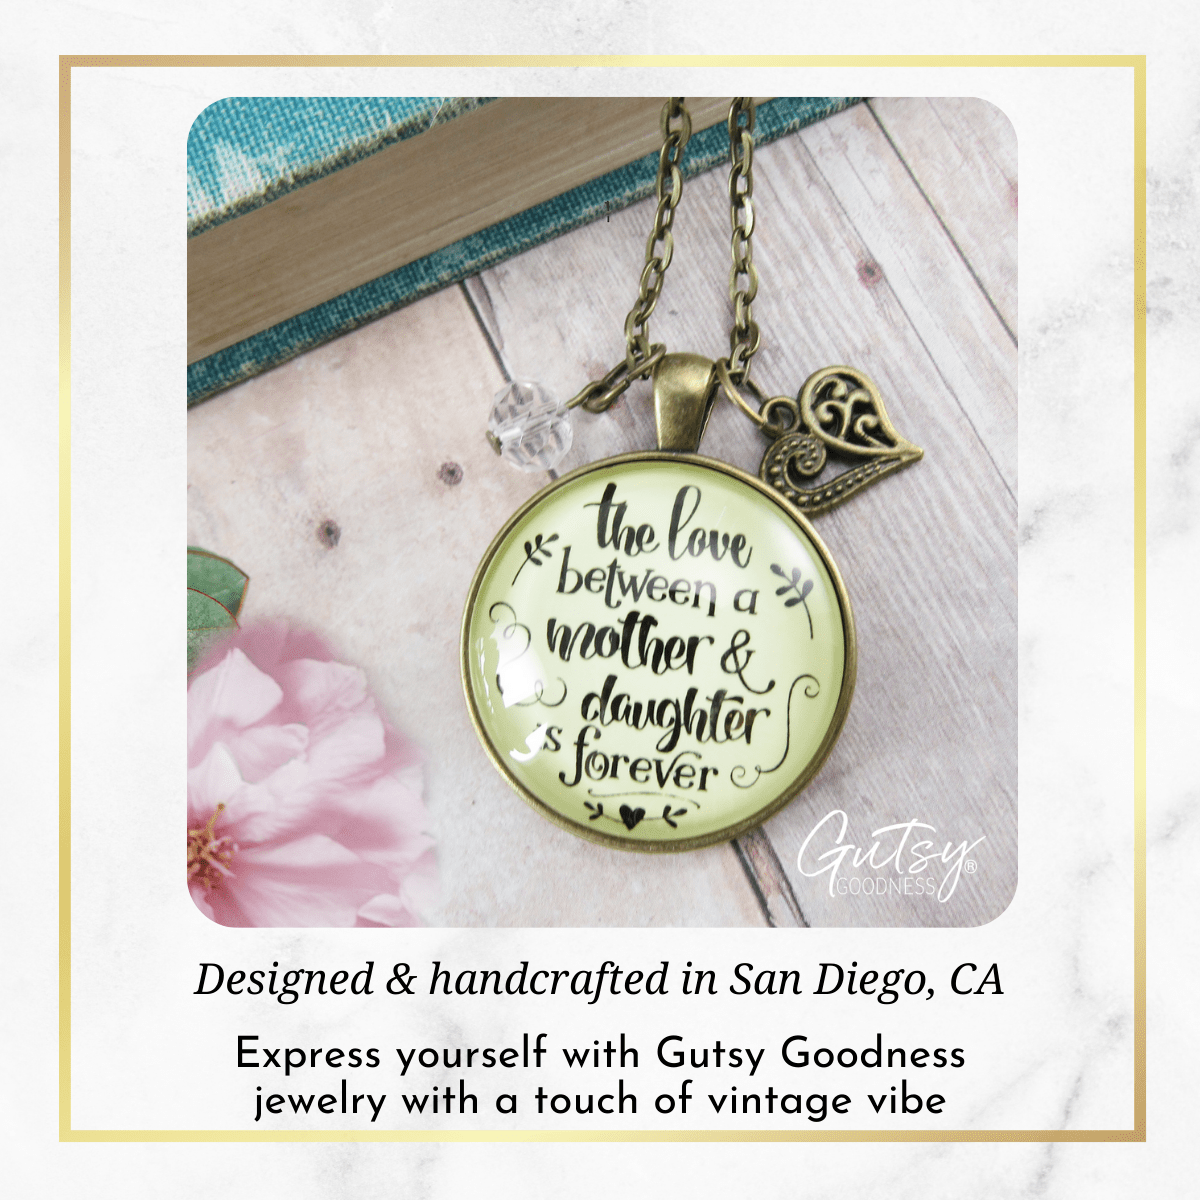 Gutsy Goodness Love Between Mother Daughter Necklace Meaningful Womens Jewelry Gift - Gutsy Goodness Handmade Jewelry;Love Between Mother Daughter Necklace Meaningful Womens Jewelry Gift - Gutsy Goodness Handmade Jewelry Gifts